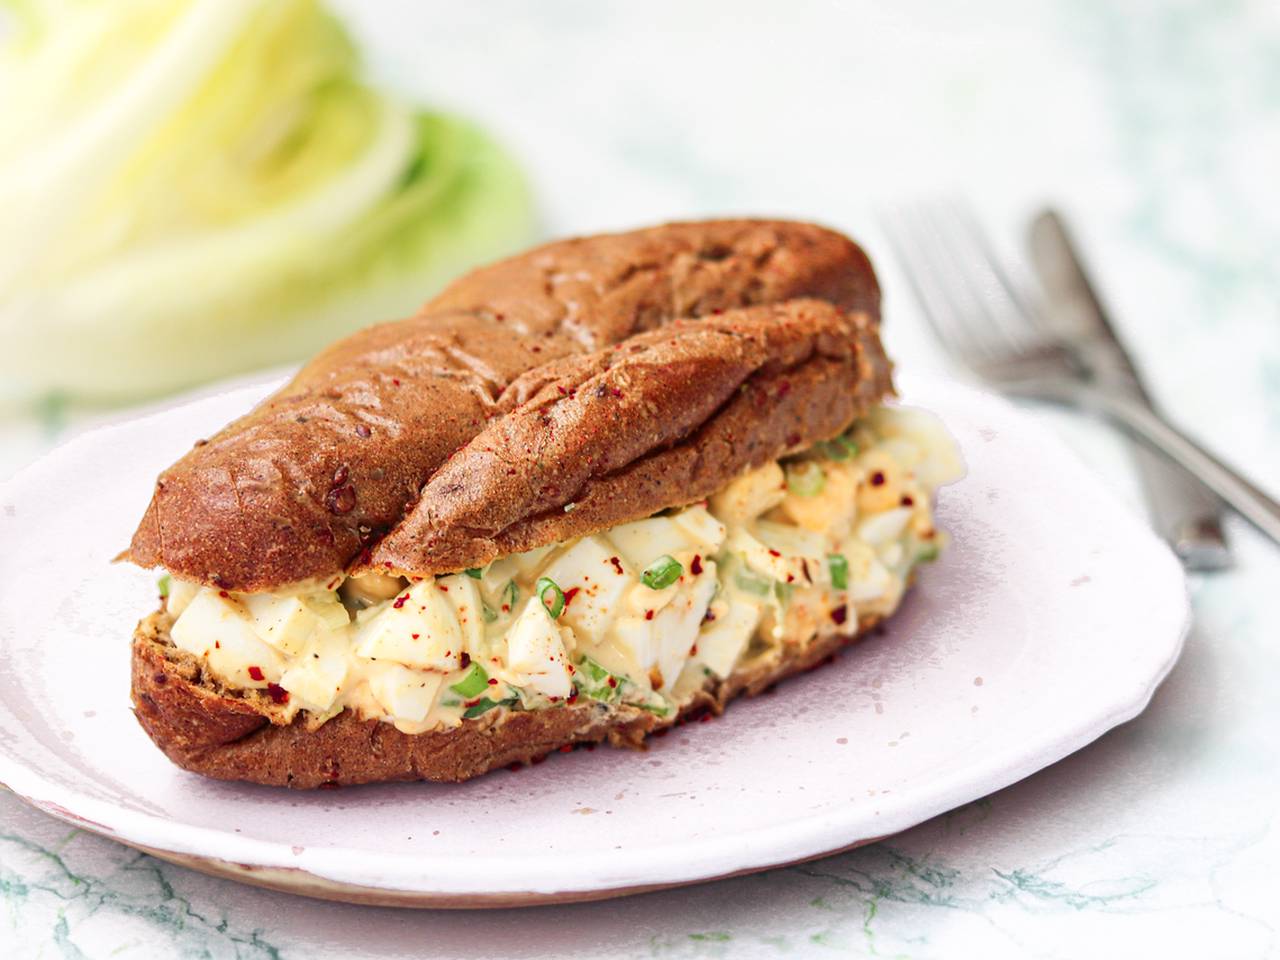 The Perfect Egg Salad for Sandwich